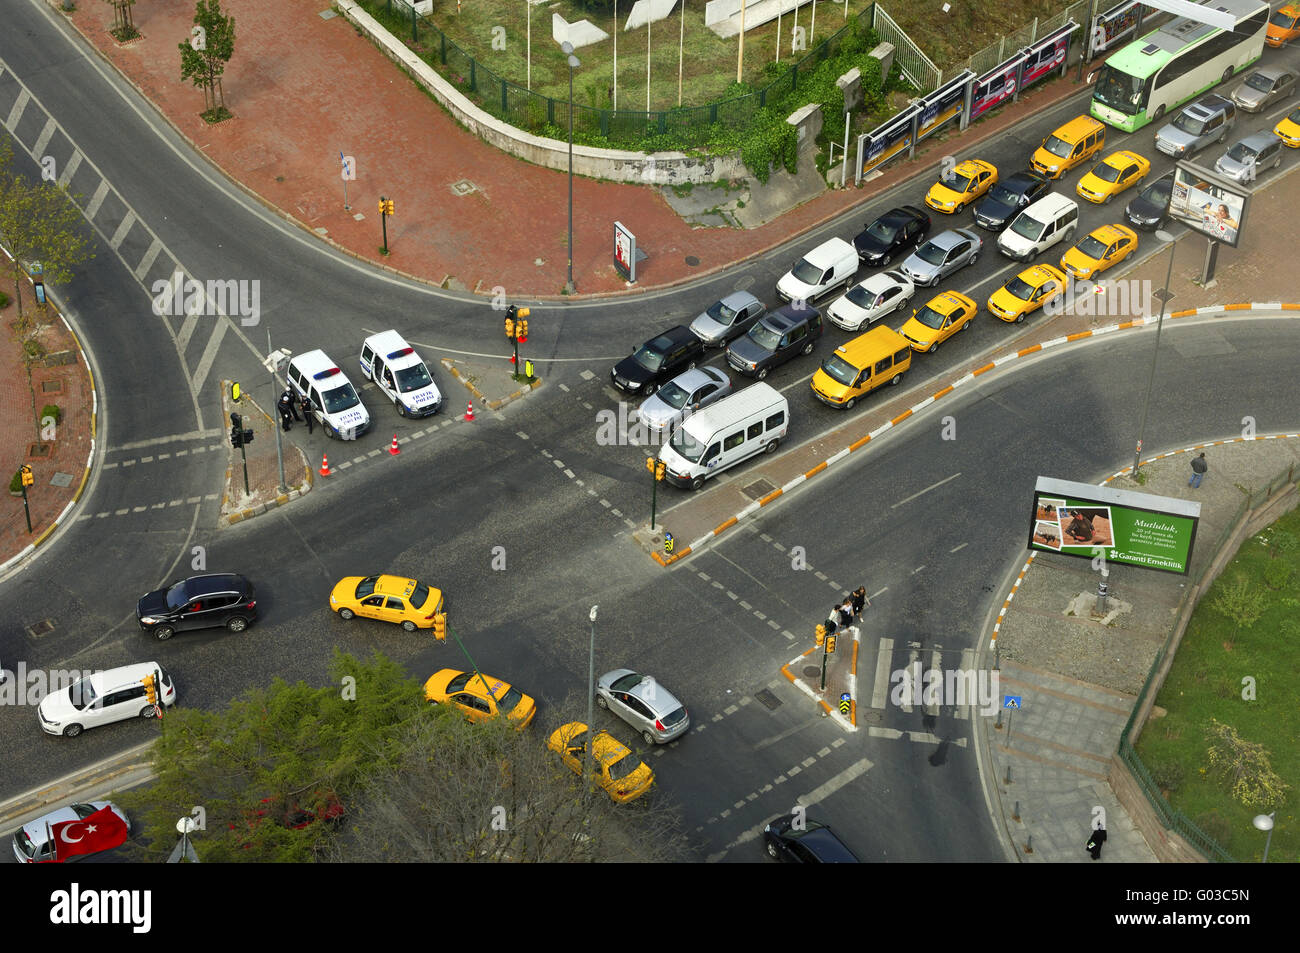 busy intersection with yellow cabs, Istanbul Stock Photo